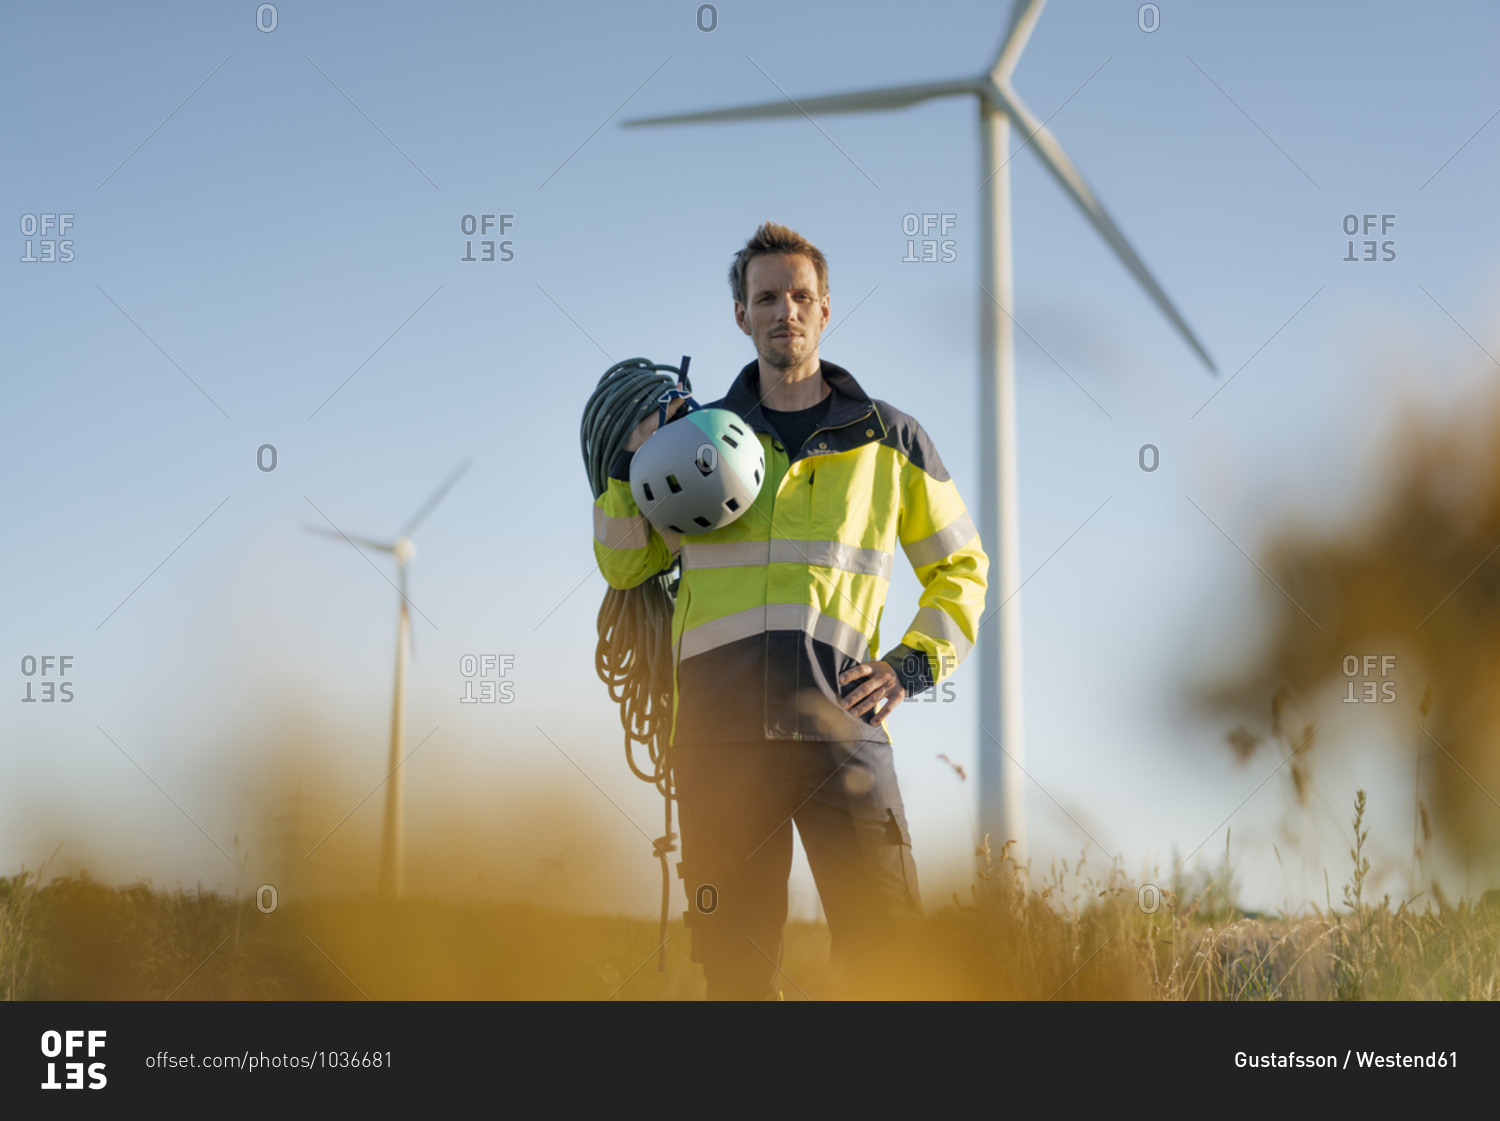 Technician standing in a field at a wind farm with climbing equipment